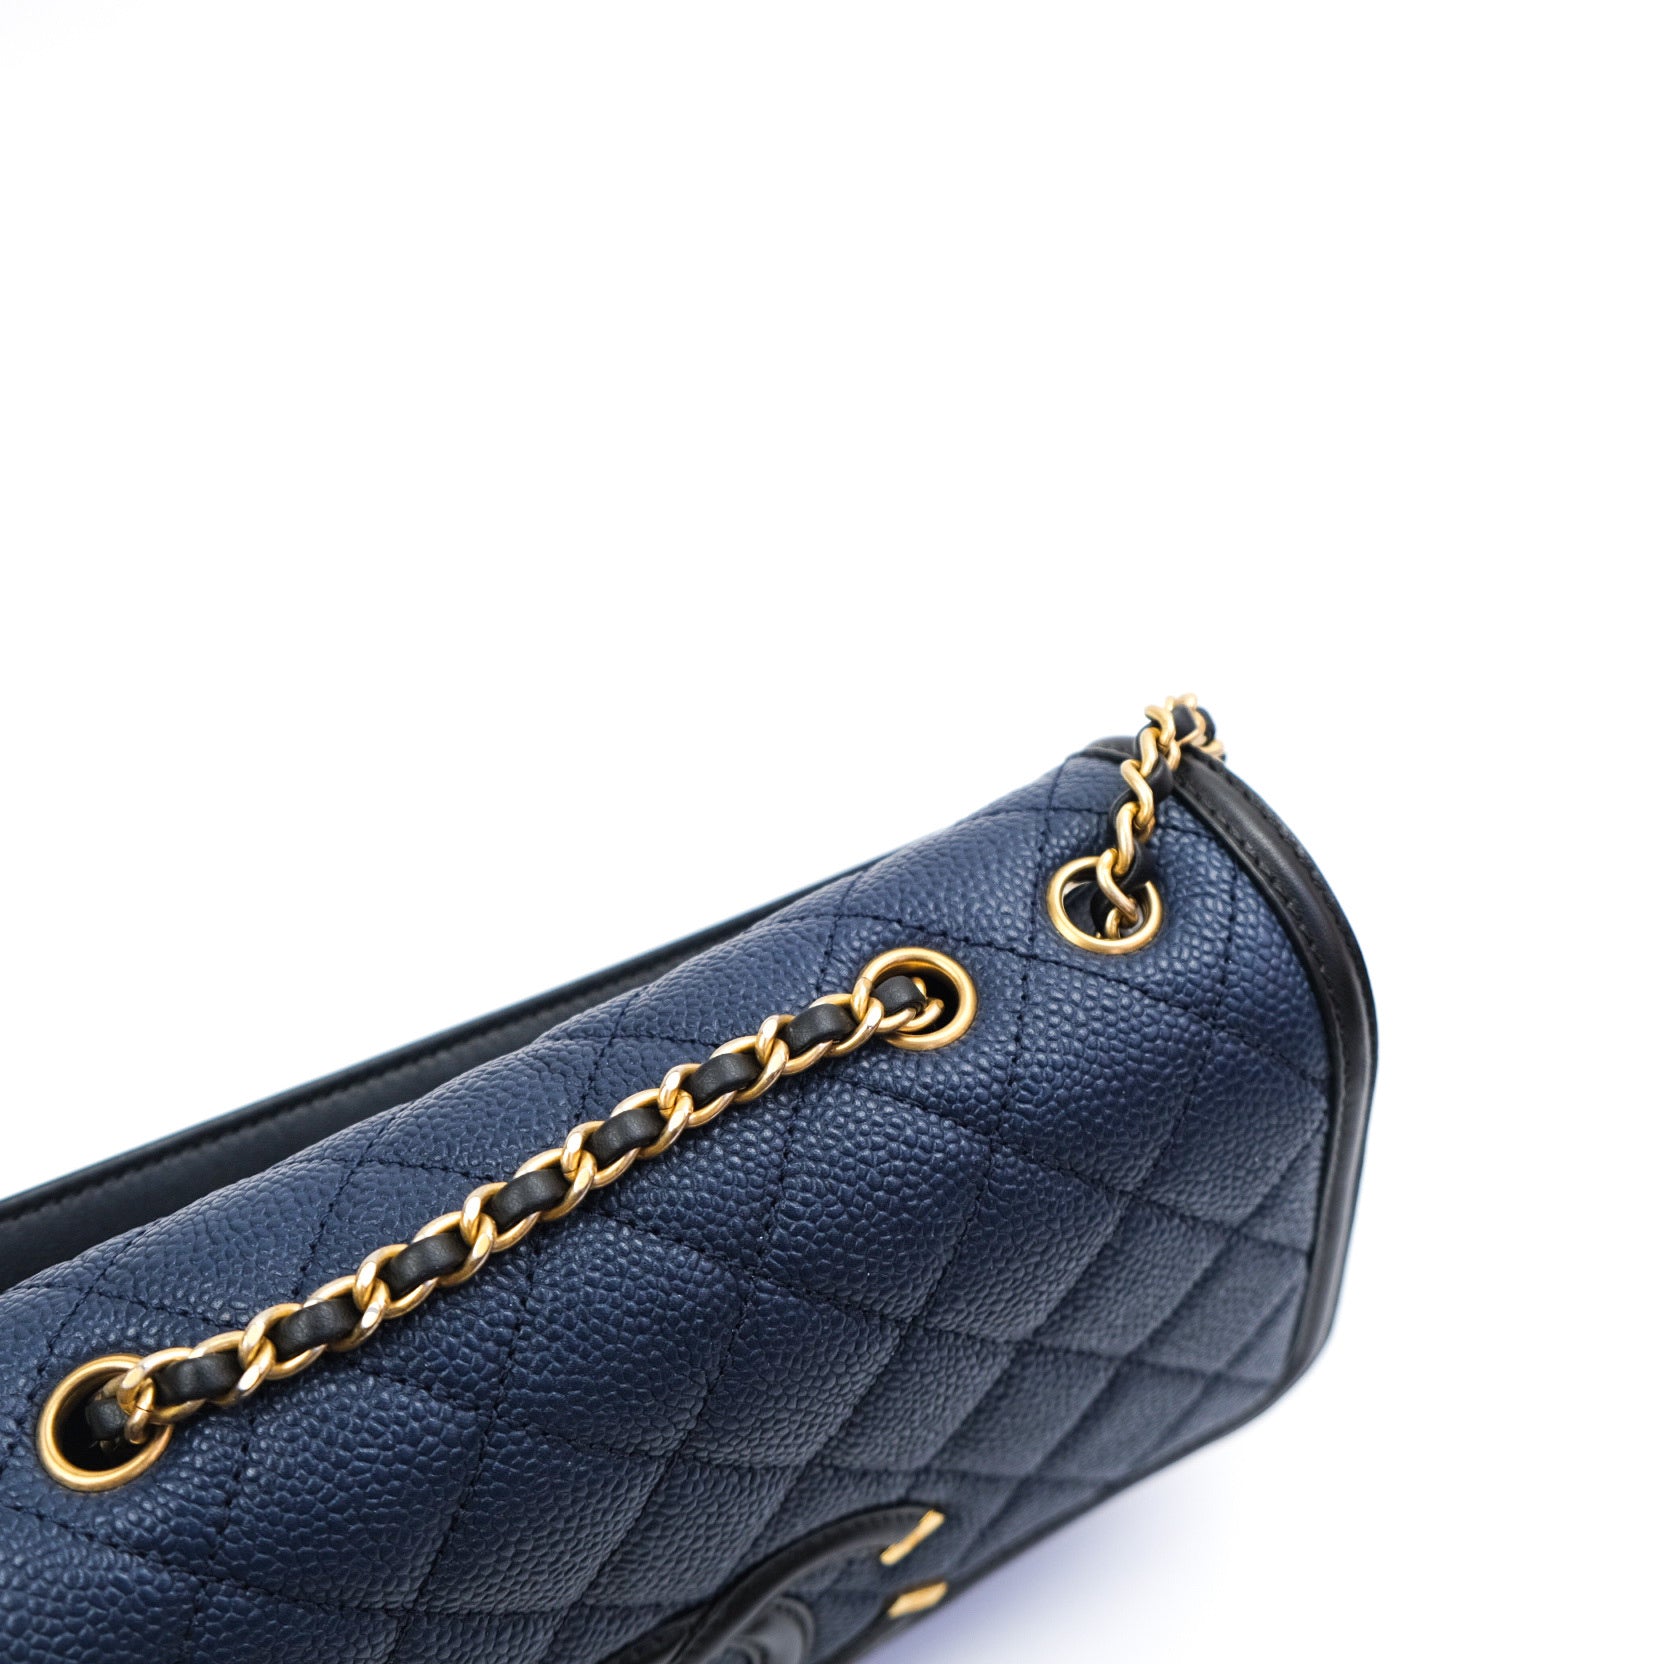 Chanel - Authenticated CC Filigree Handbag - Leather Navy Plain for Women, Very Good Condition